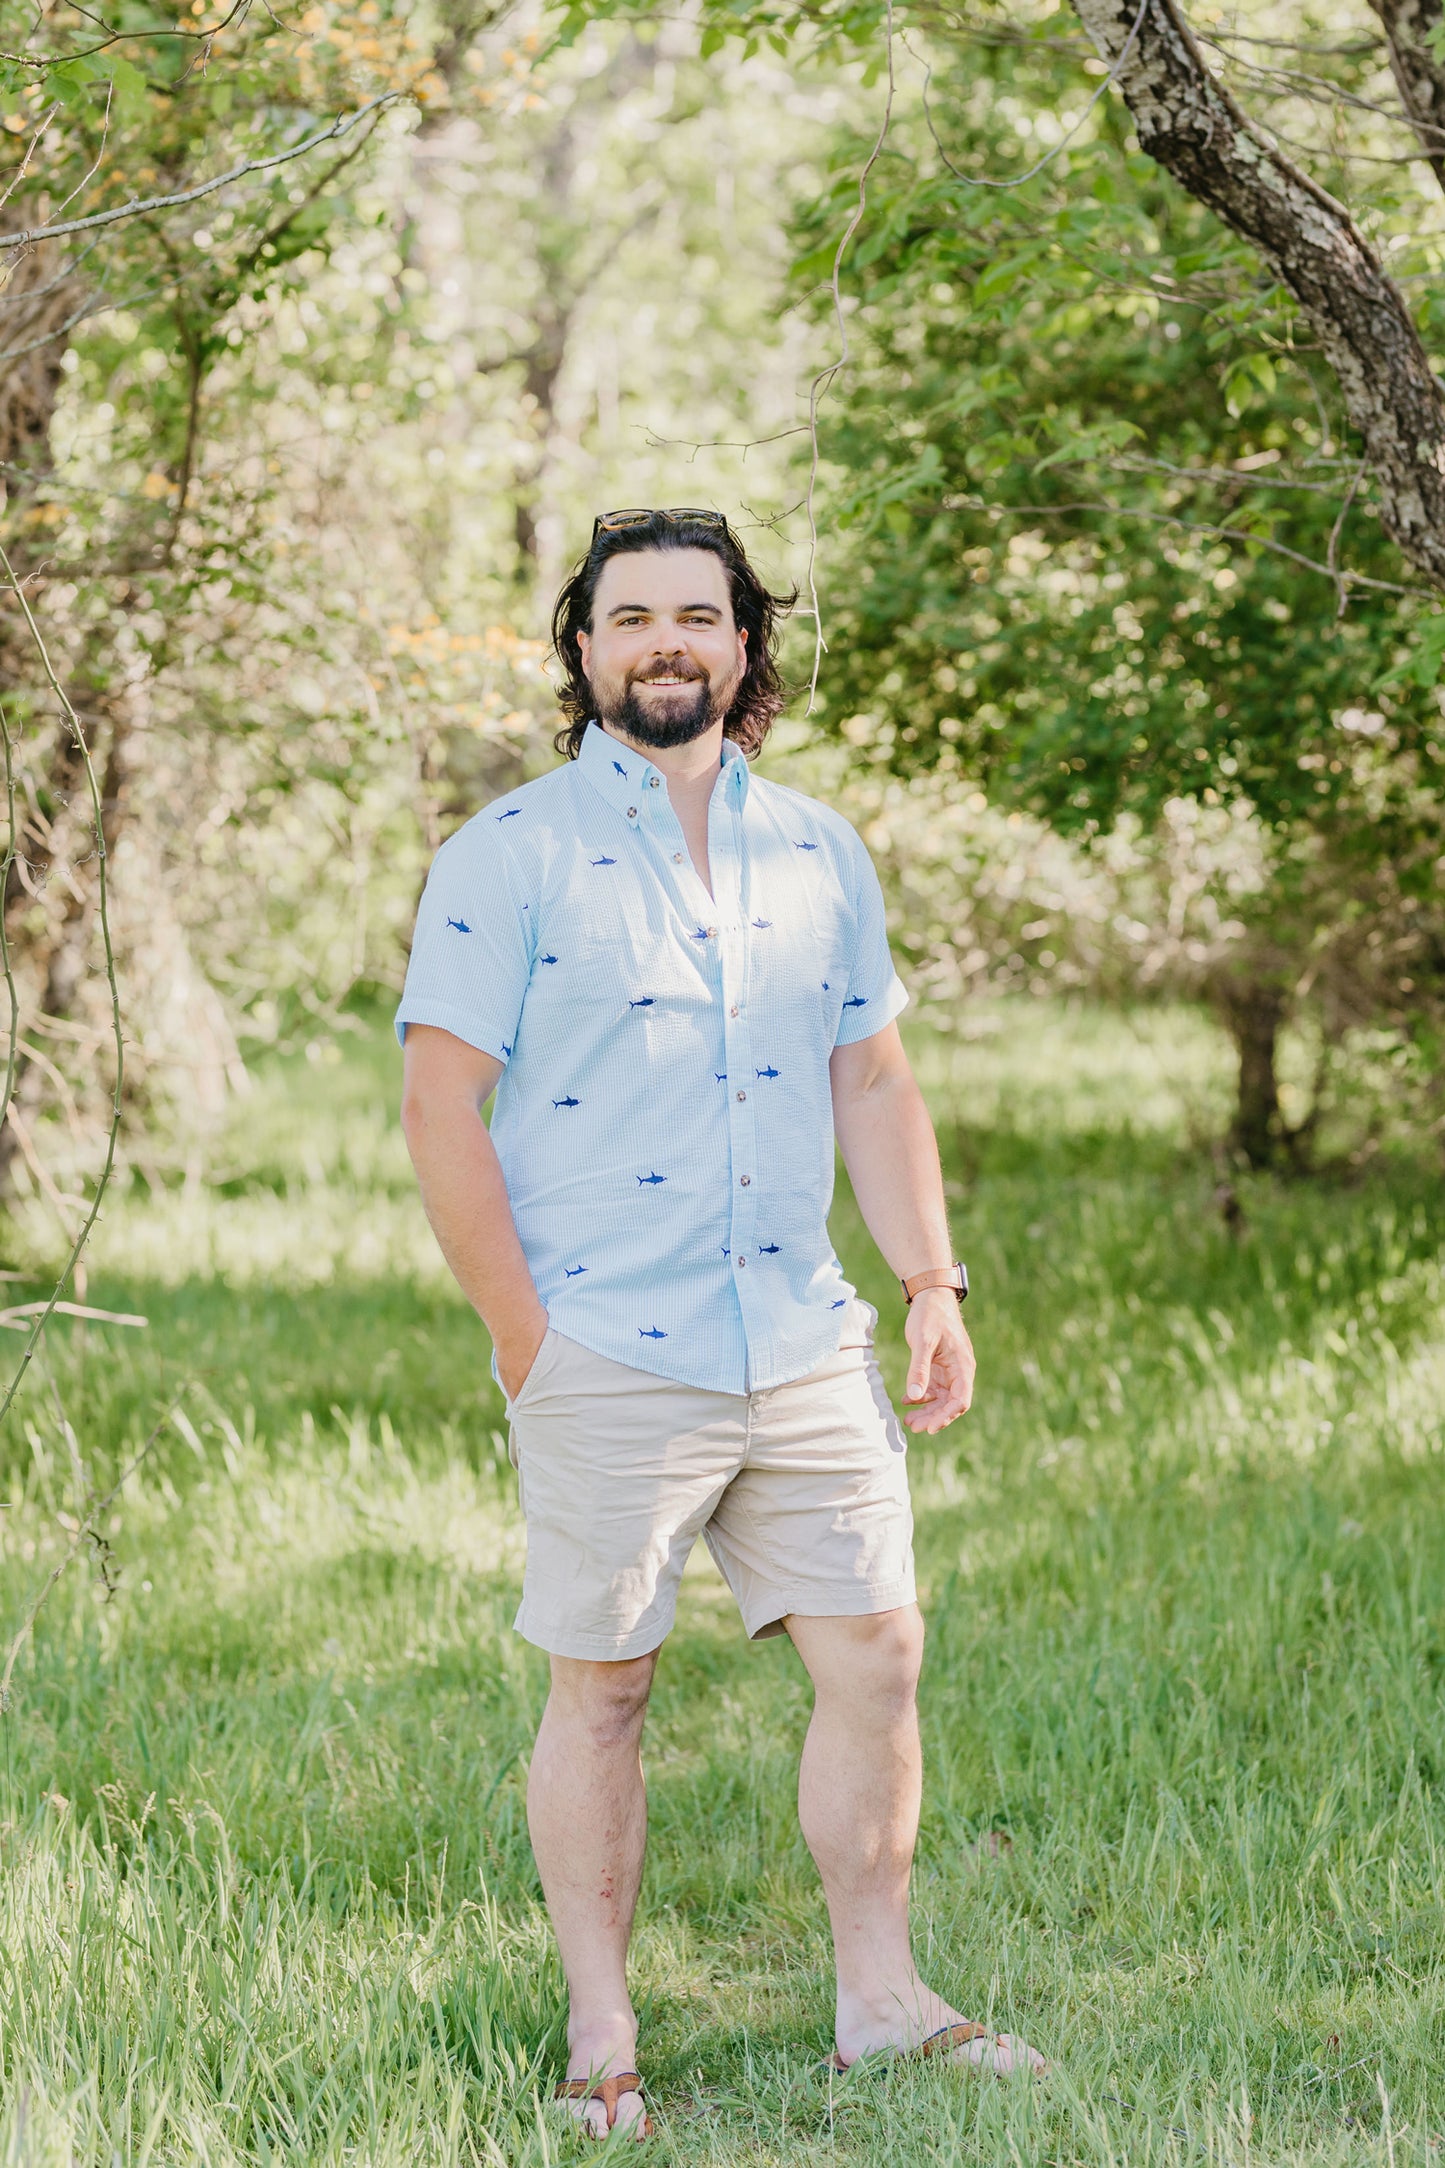 Turquoise Seersucker with Navy Sharks Button Down Short Sleeved Shirt